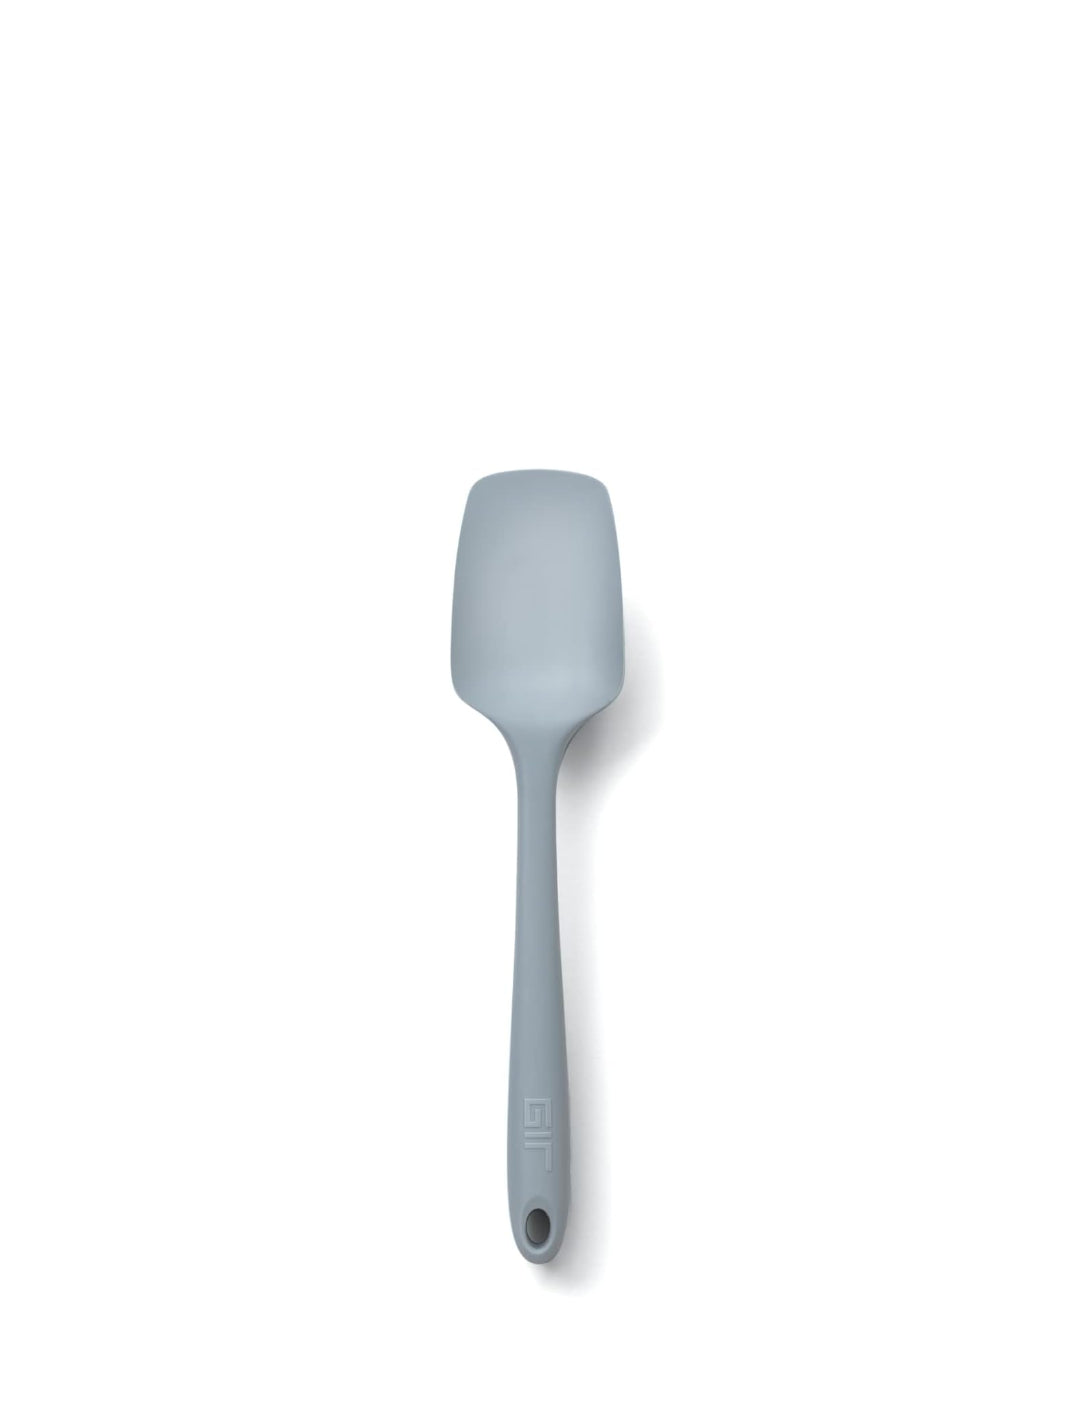 GIR Spoonula Is Amazing All-in-One Kitchen Utensil: Review